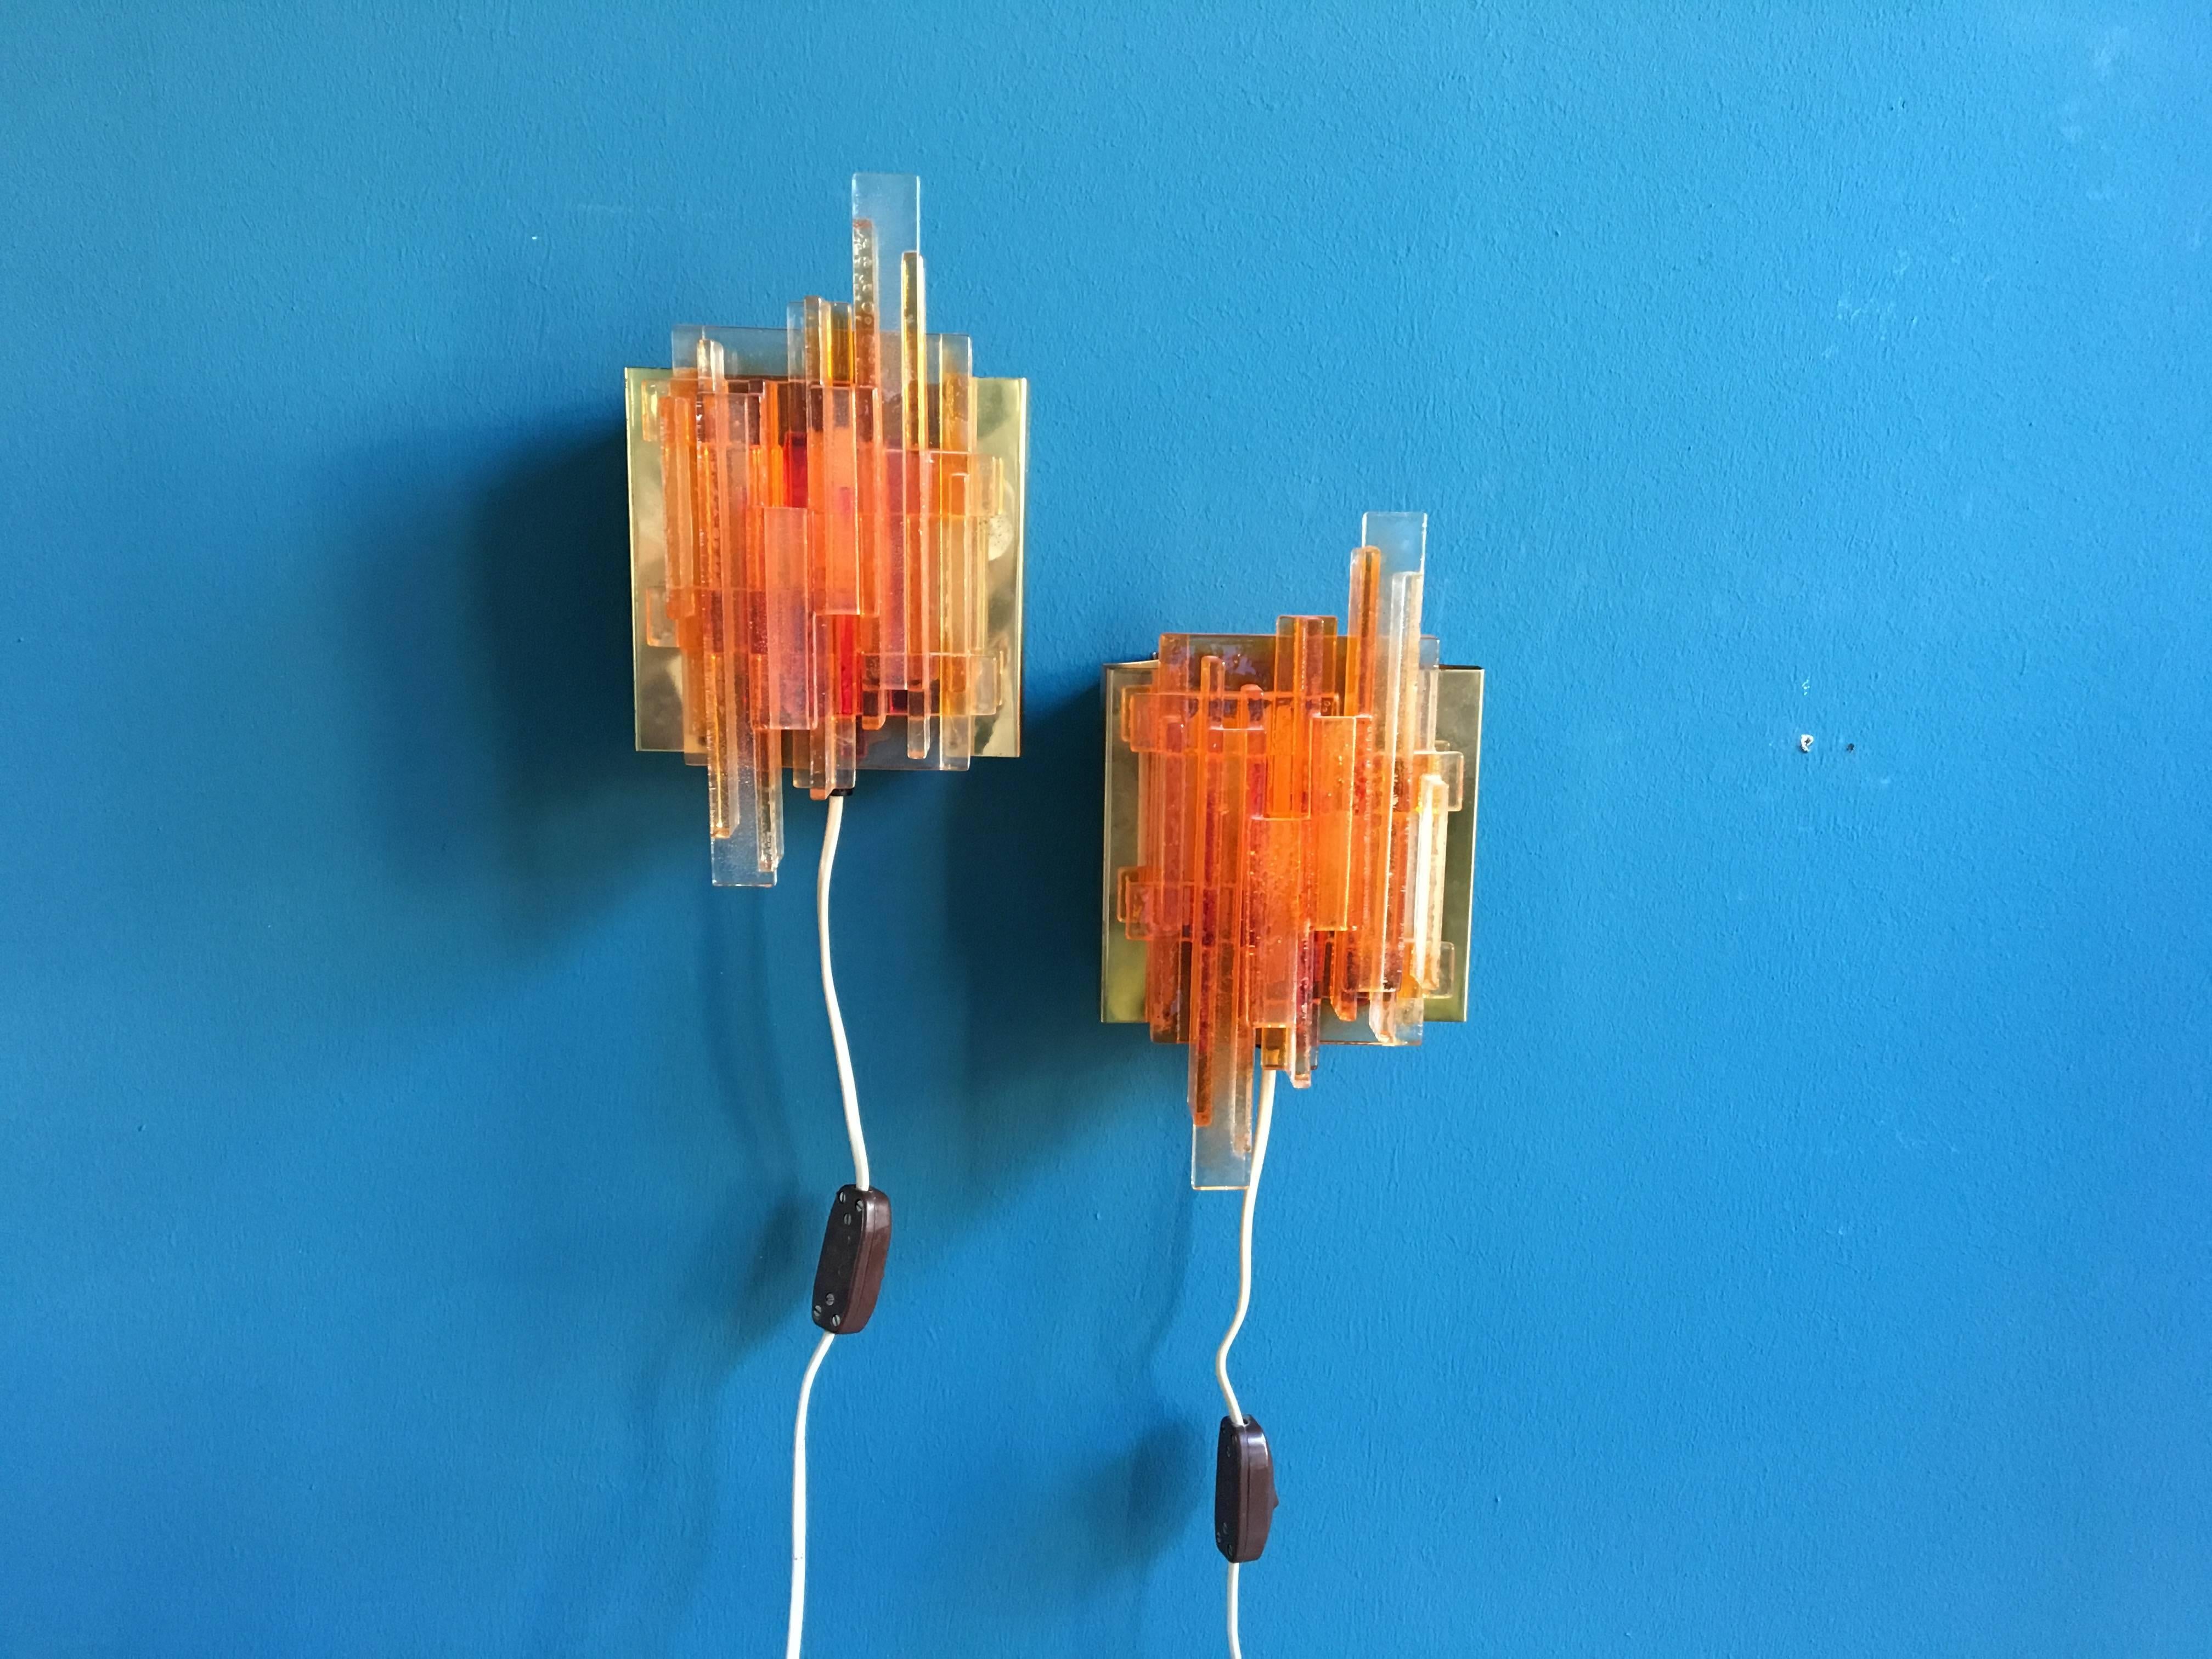 Danish Set of Two Orange Acrylic Wall Lights Model 1004 by Claus Bolby, Denmark, 1970